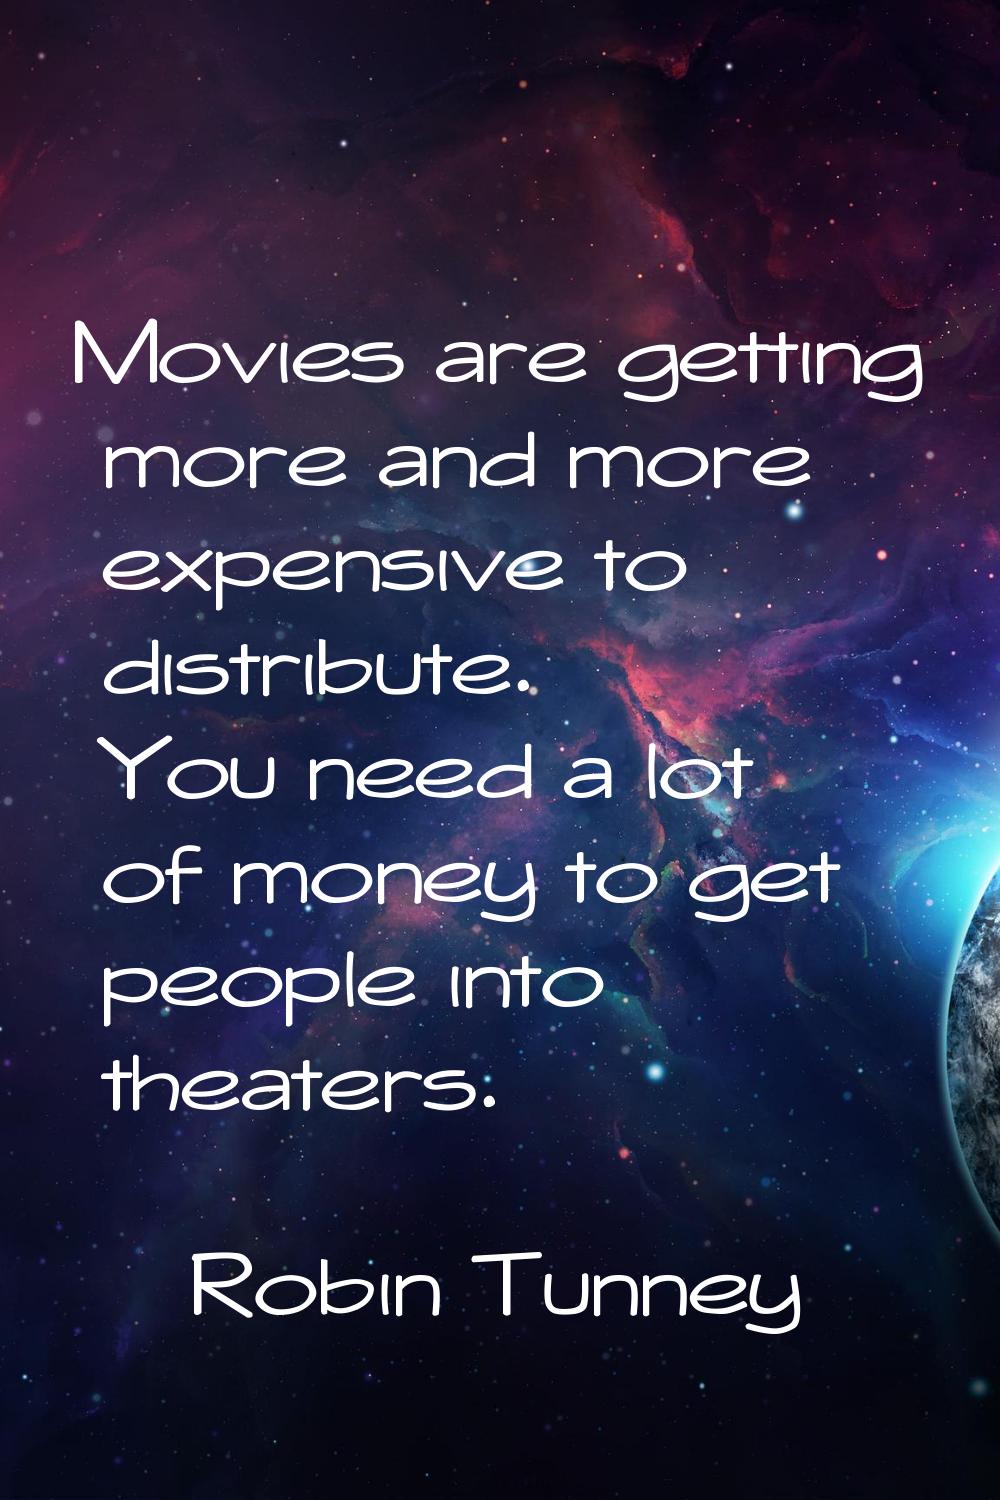 Movies are getting more and more expensive to distribute. You need a lot of money to get people int